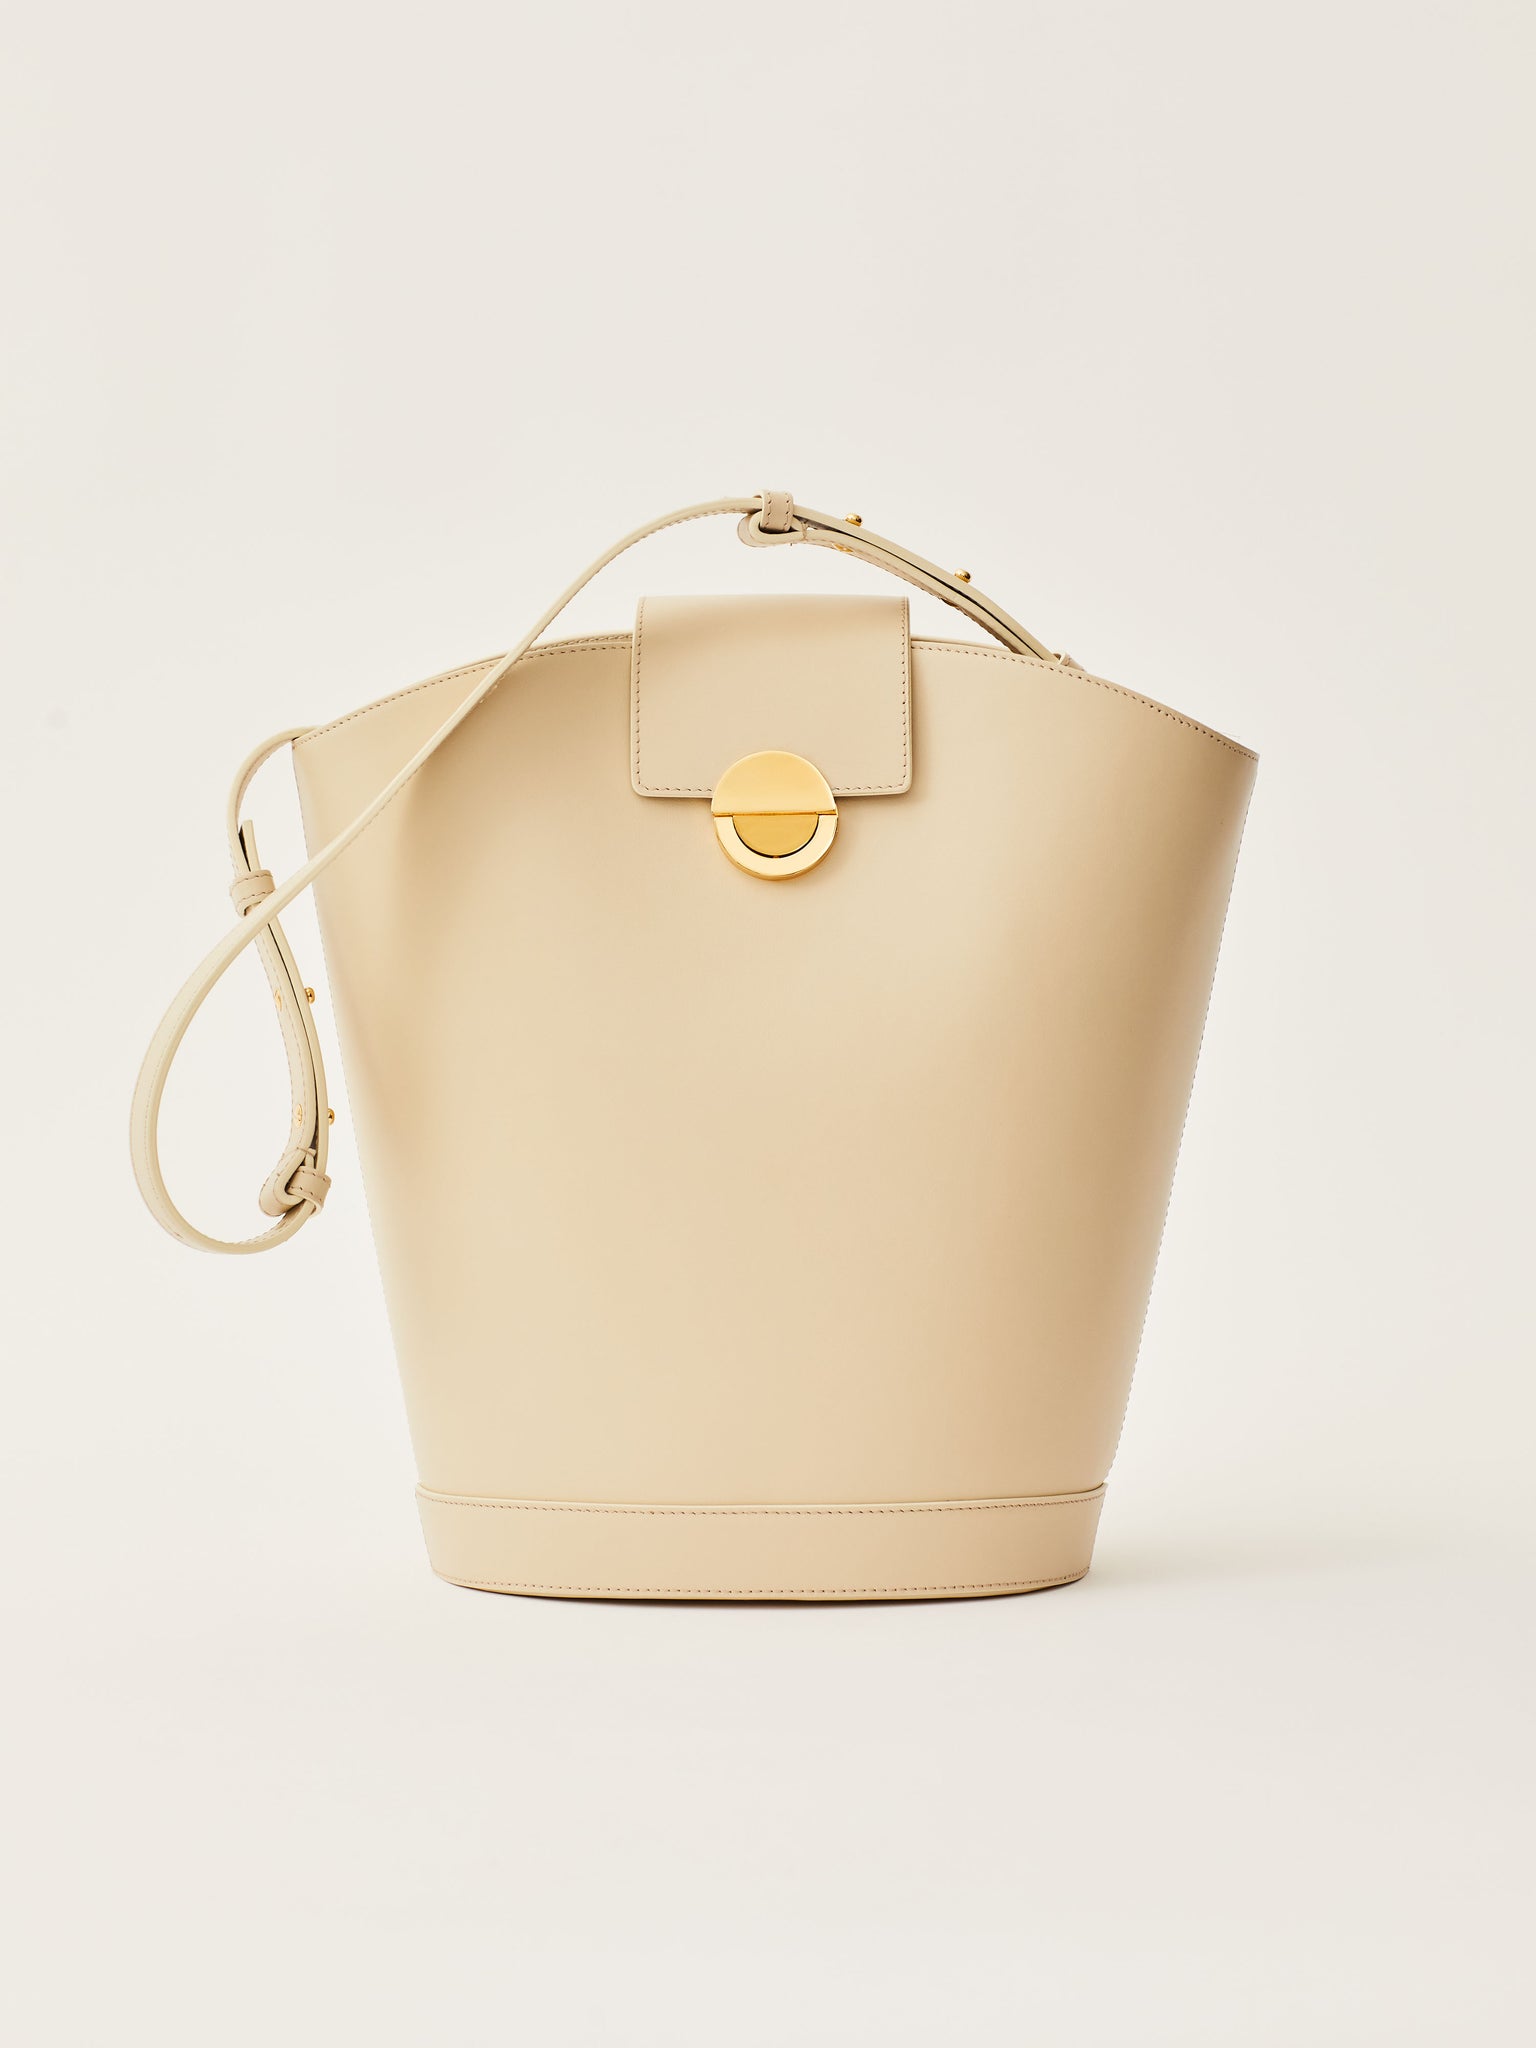 Objets Daso Ivory Leather Vivian Handbag: Front View with Draped Shoulder Strap